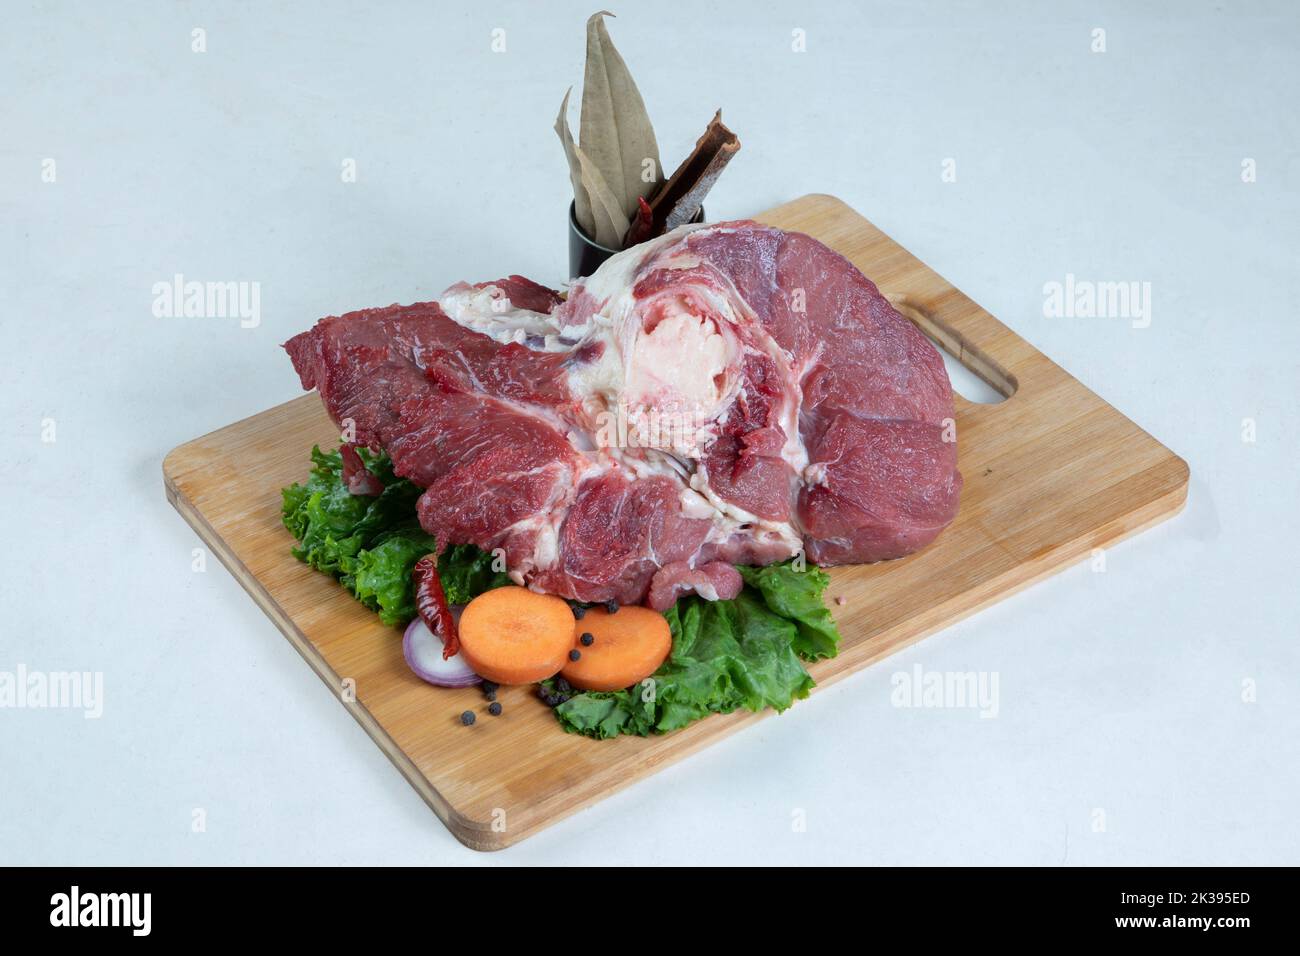 Raw beef steak with rosemary and spices on wooden board Stock Photo